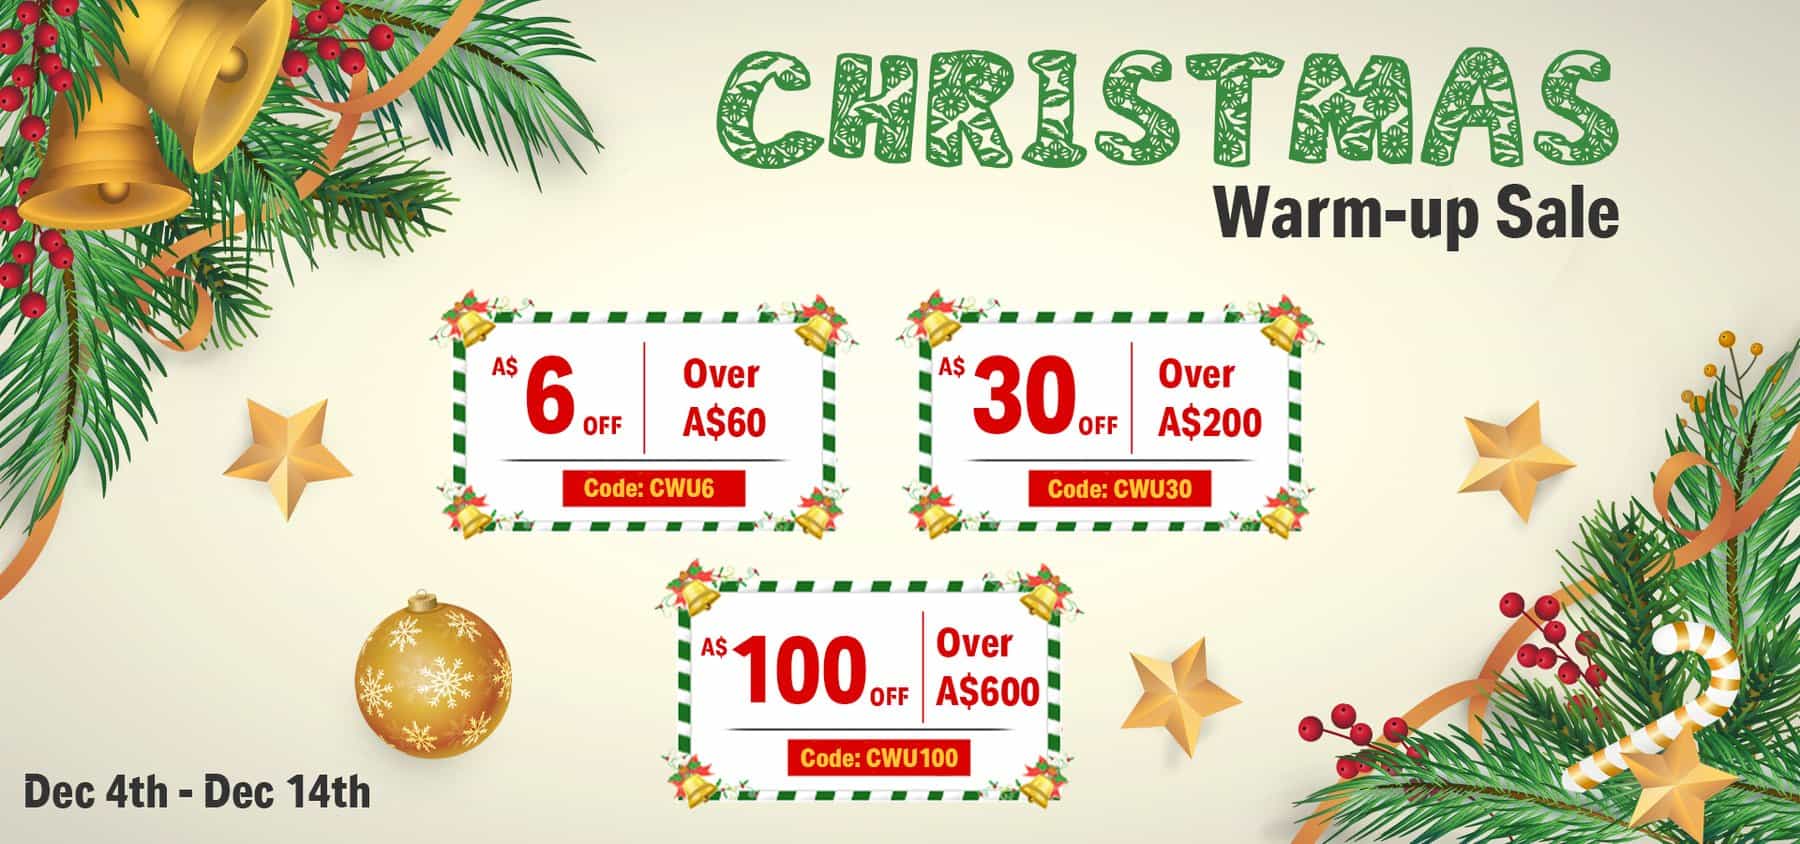 Donner Christmas Warm-up sale spend & save up to $100 OFF with coupons